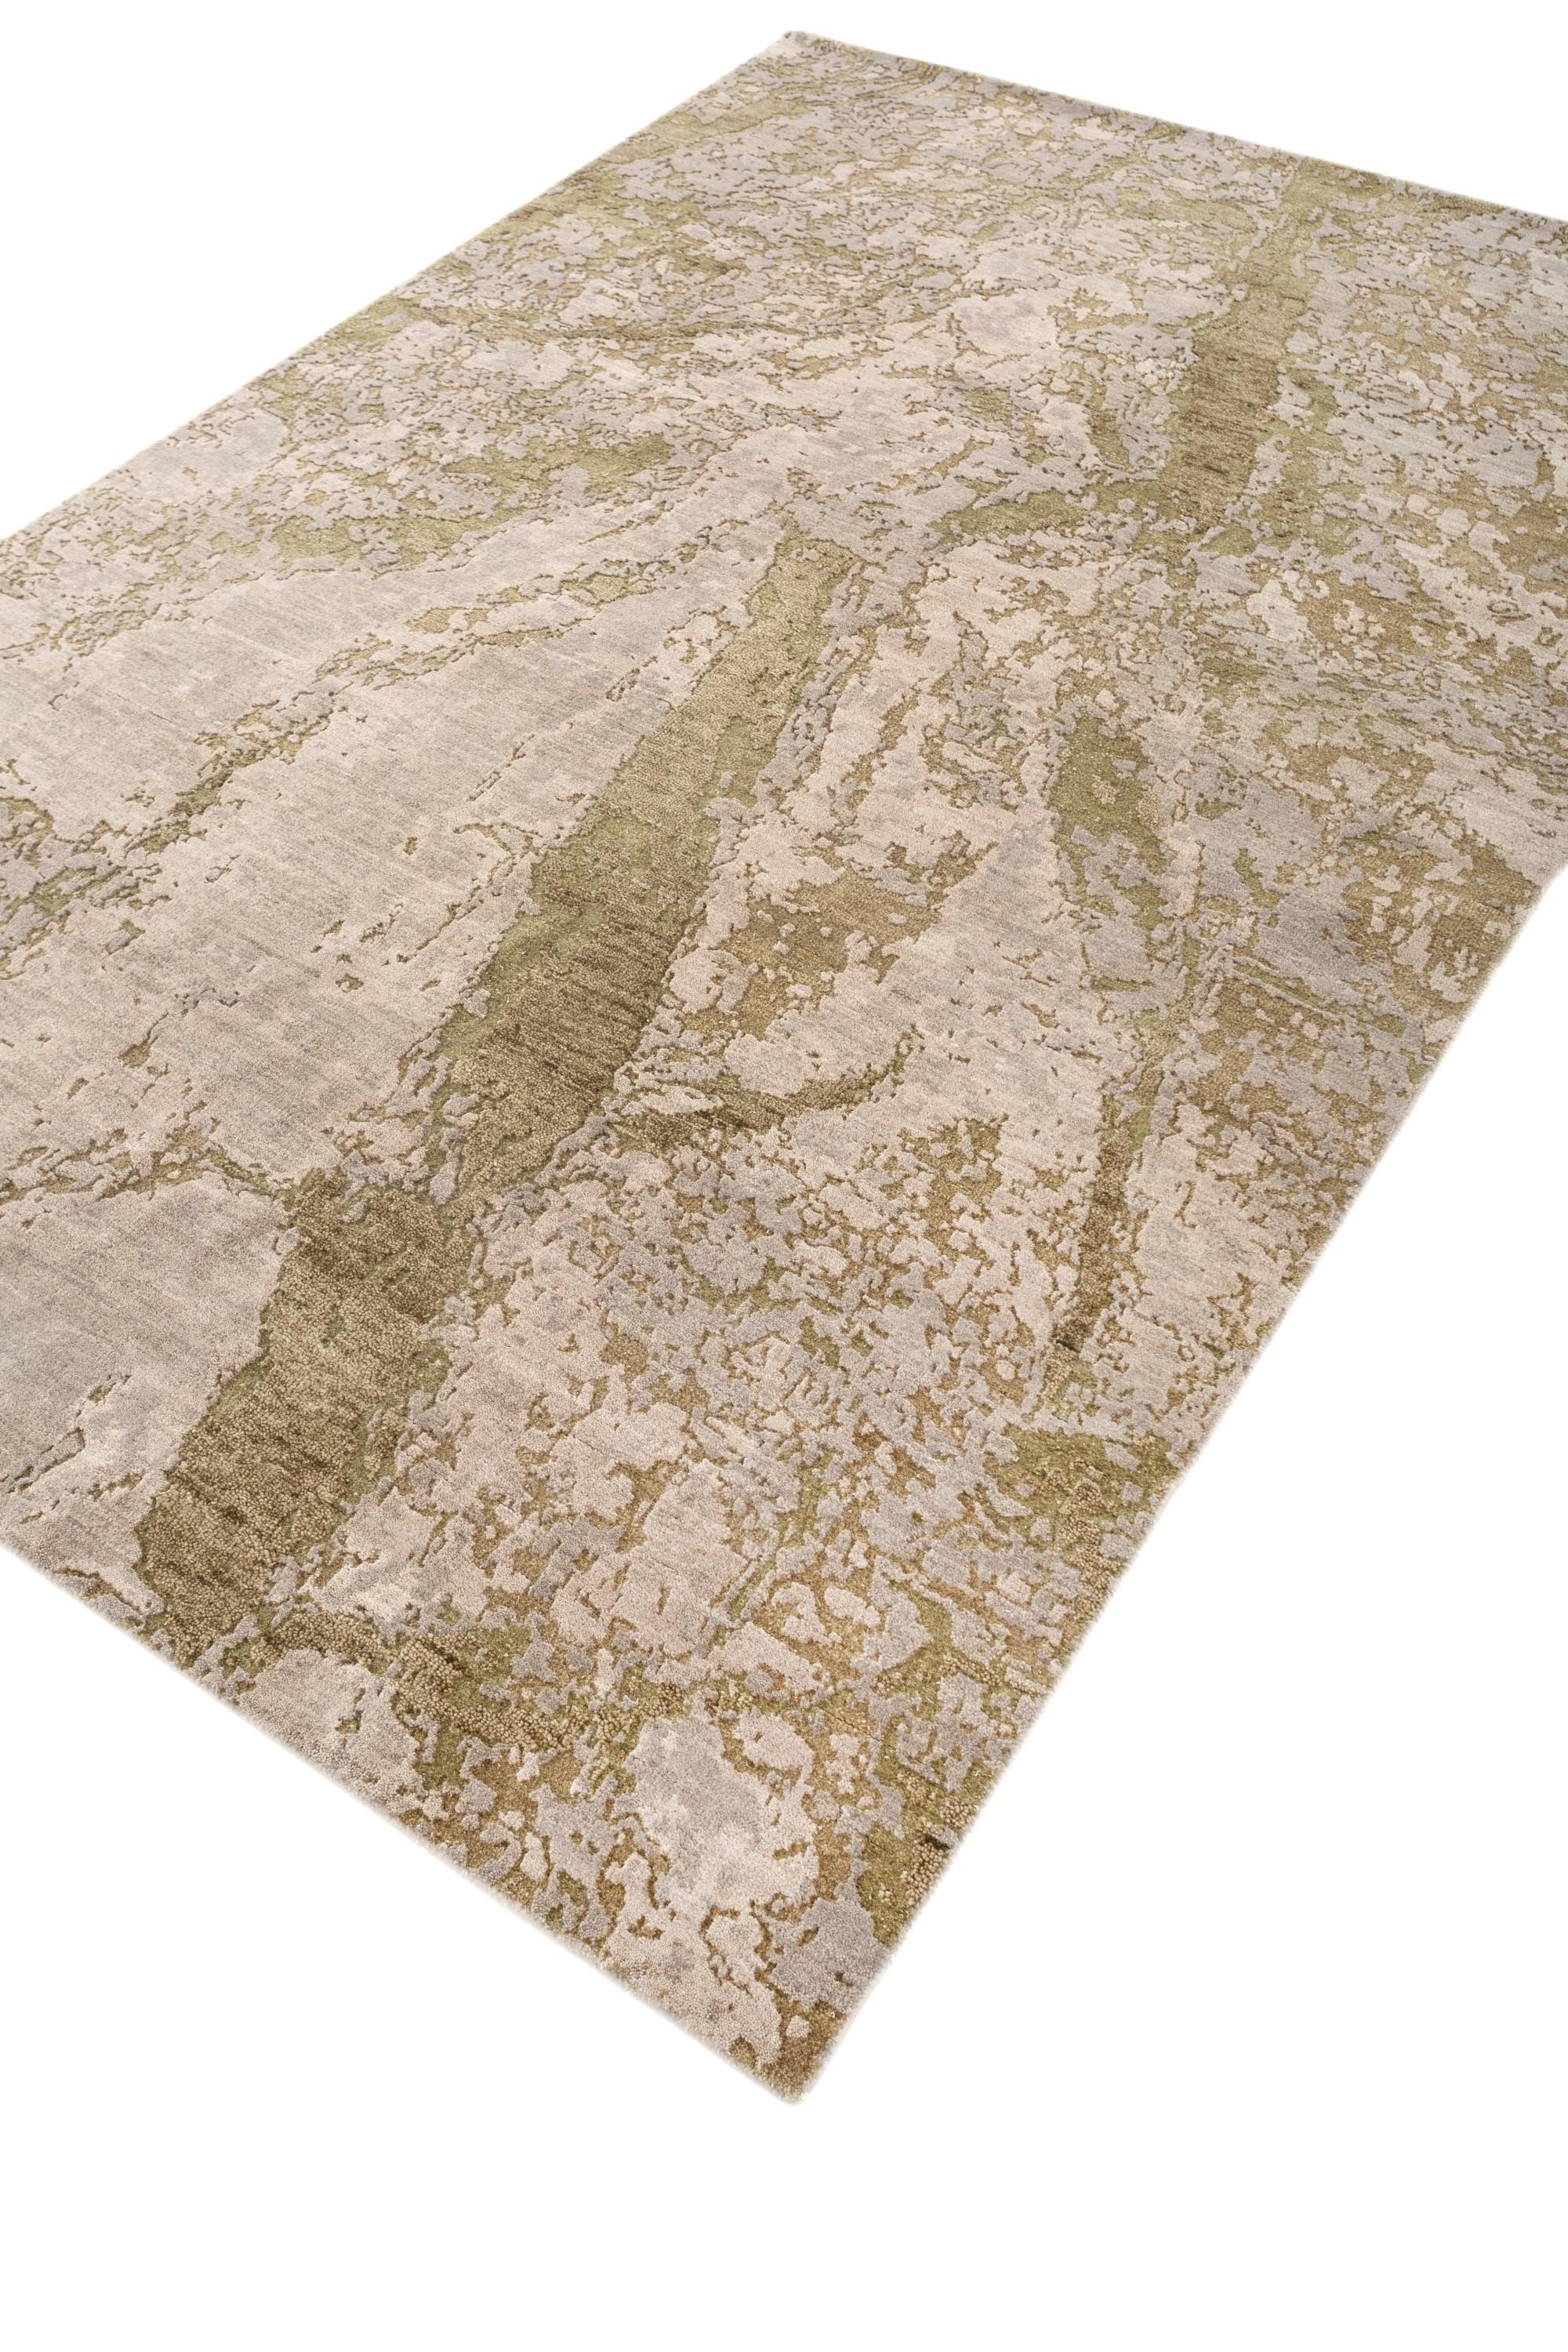 Modern Enigmatic Shadows Dark Taupe & Mink 180X270 cm Hand Knotted Rug For Sale